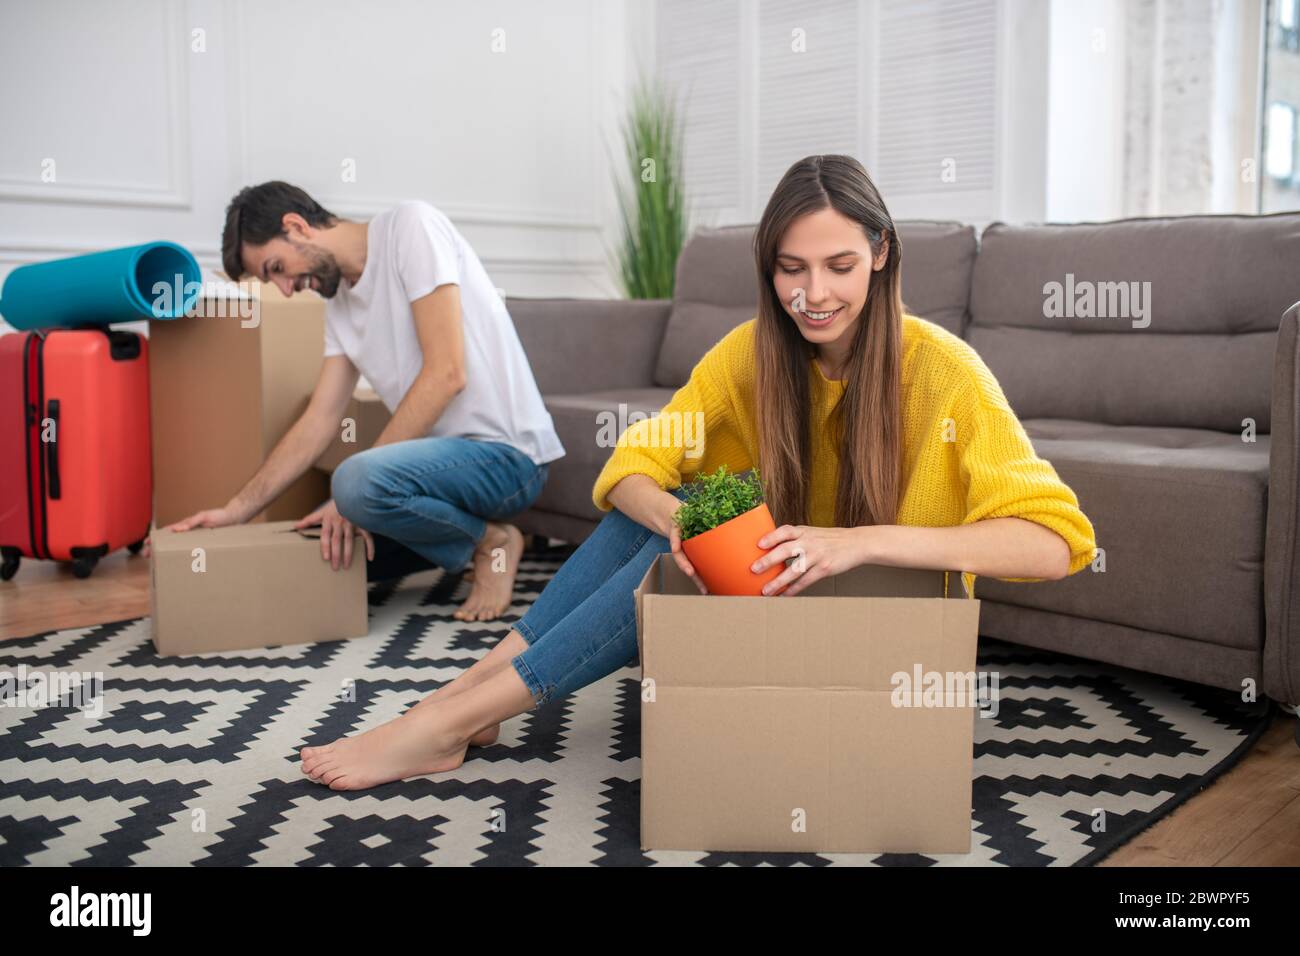 Girl sitting with flowerpot in the hands, man closing box Stock Photo